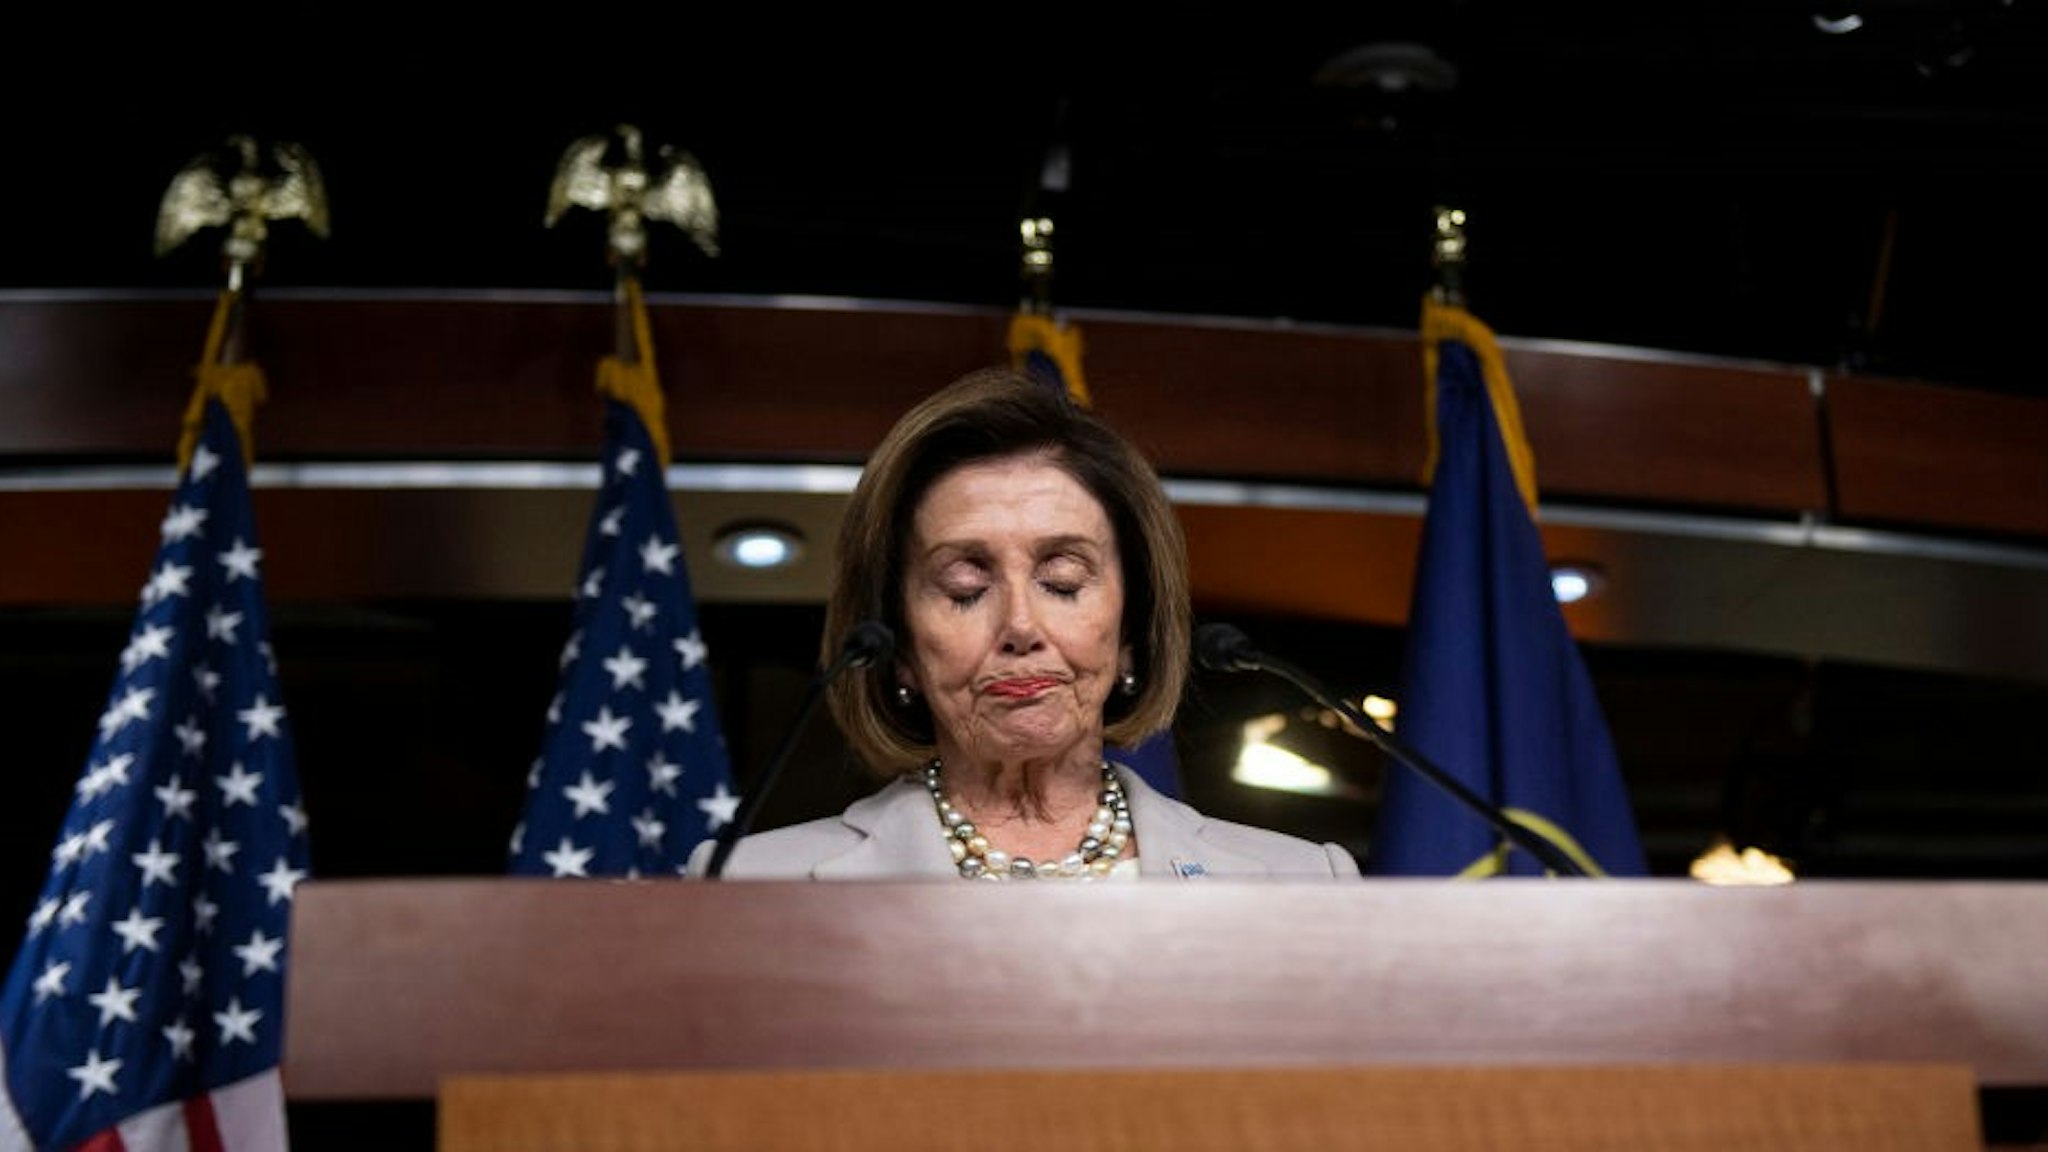 House Speaker Nancy Pelosi of Calif., pauses while speaking about the recent passing of Rep. Elijah Cummings, during a news conference on Capitol Hill in Washington on Thursday, Oct. 17, 2019. (Photo by Caroline Brehman/CQ-Roll Call, Inc via Getty Images)